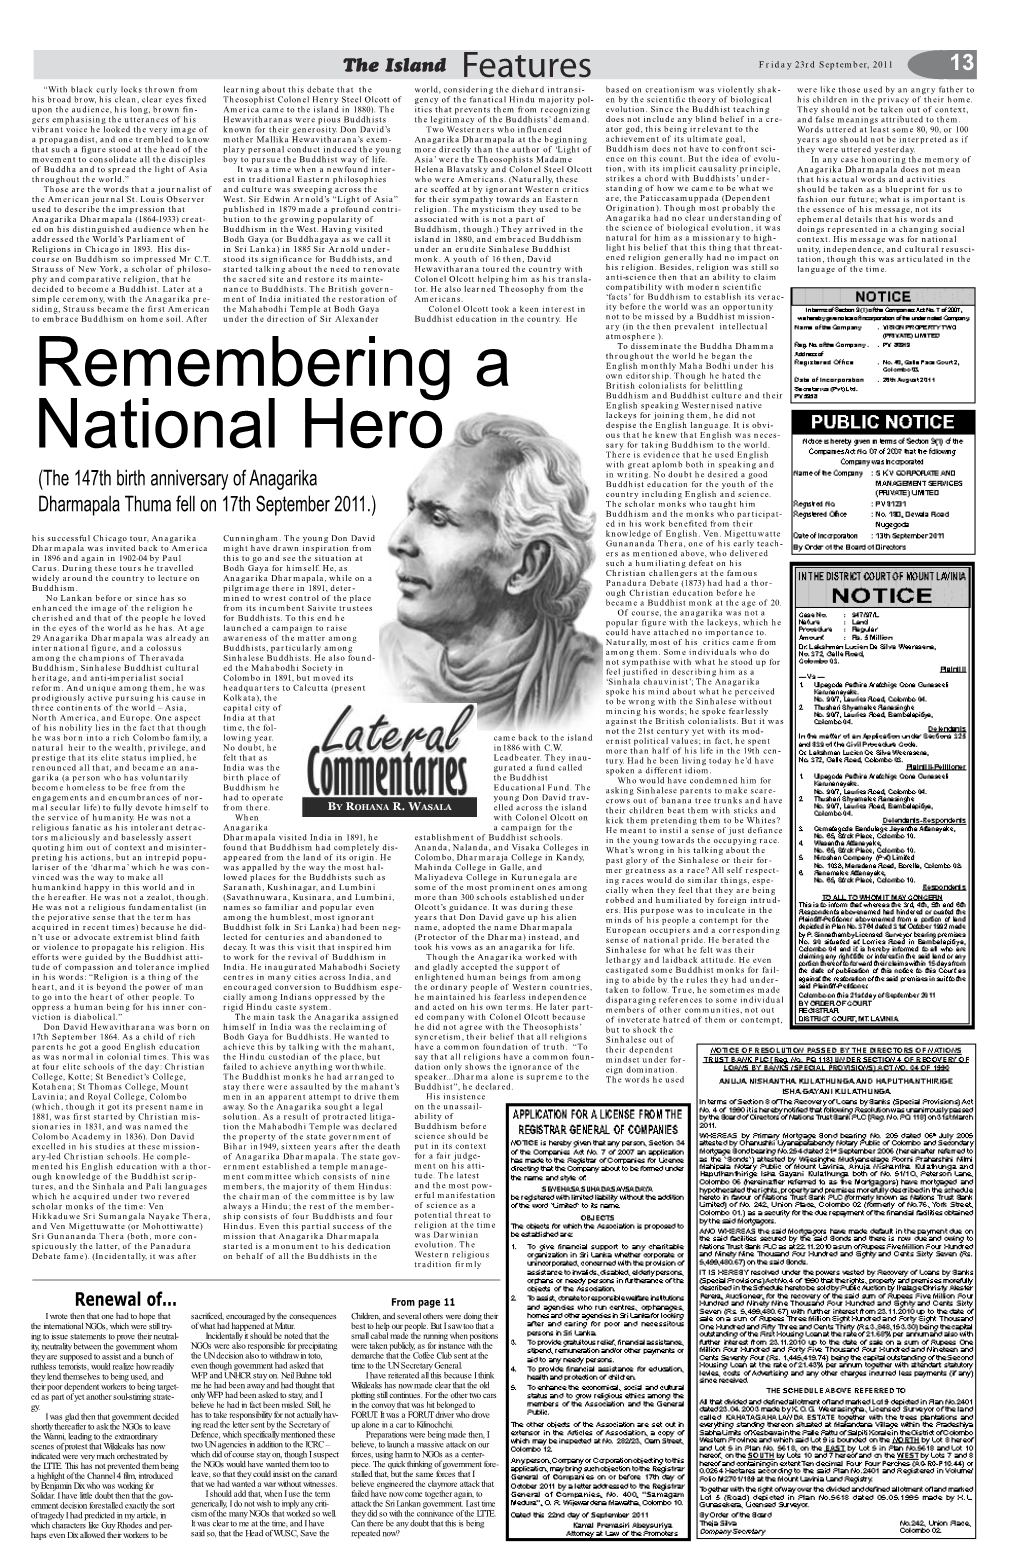 Remembering a National Hero